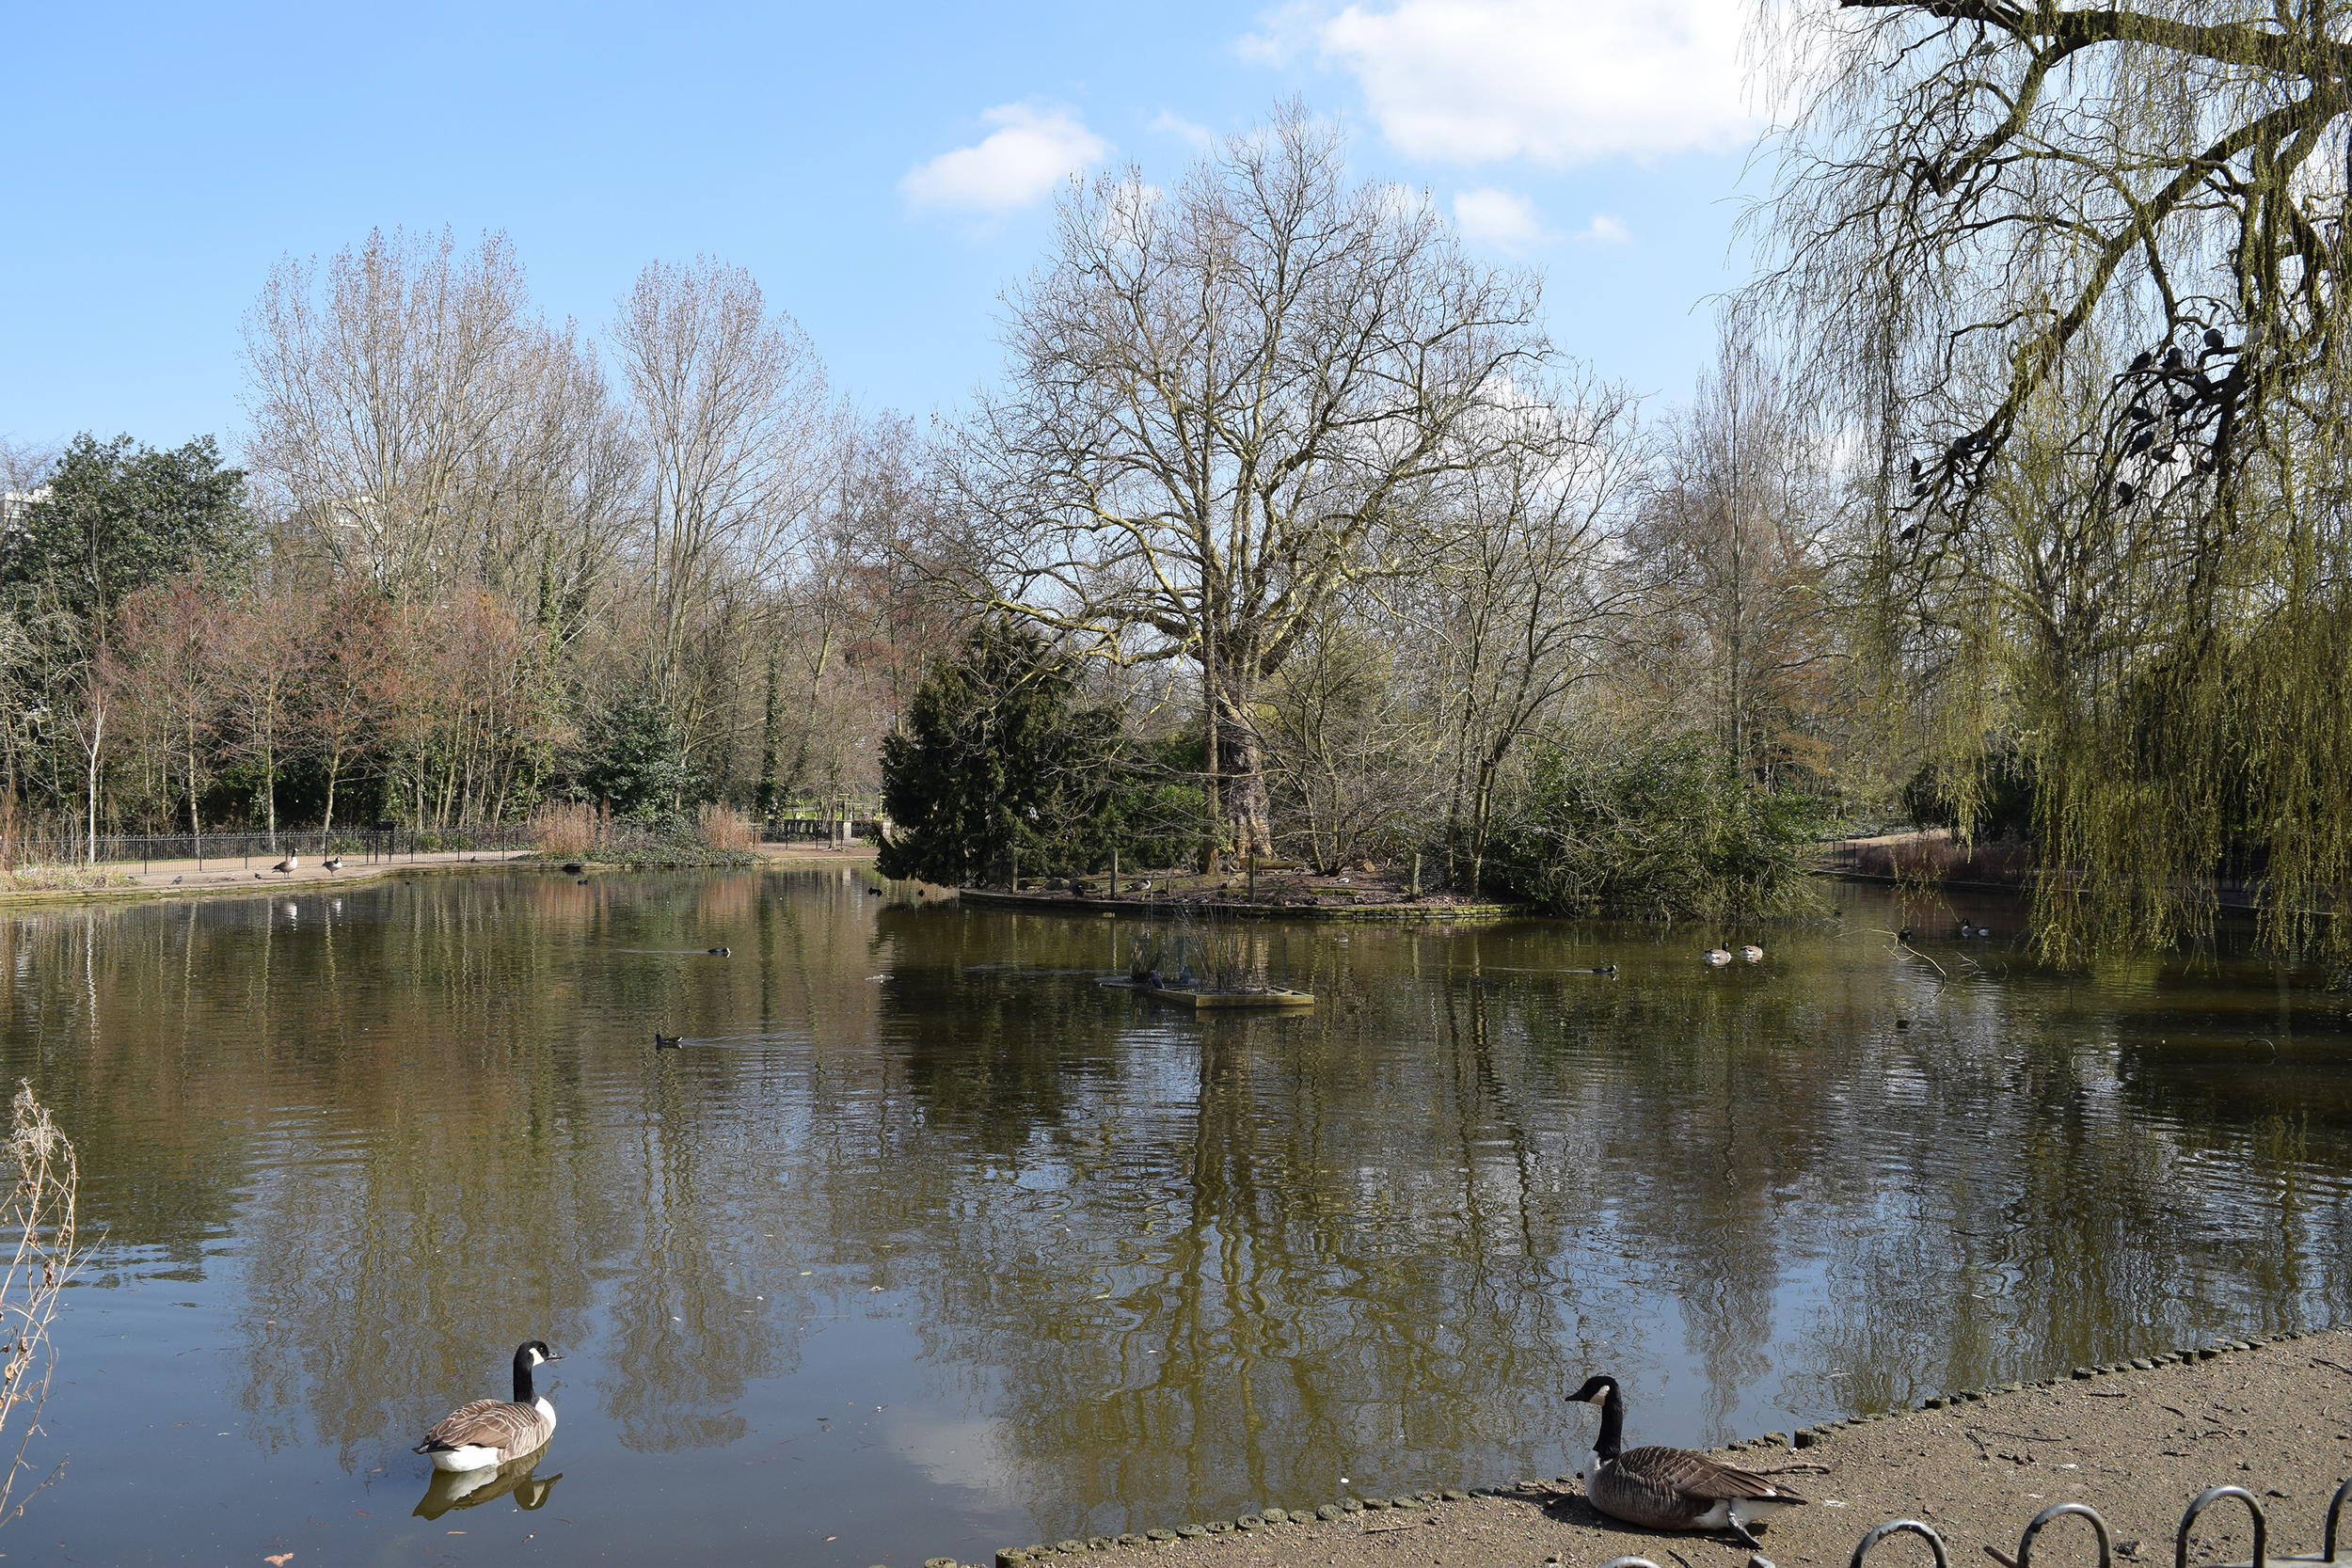  A relatively large lake and six ponds are to be found within the ornamental areas of the Park. Four of the ponds are situated in a 'landscaped valley' and are linked by a stream. The lake lies towards the east, with a central island planted with shr